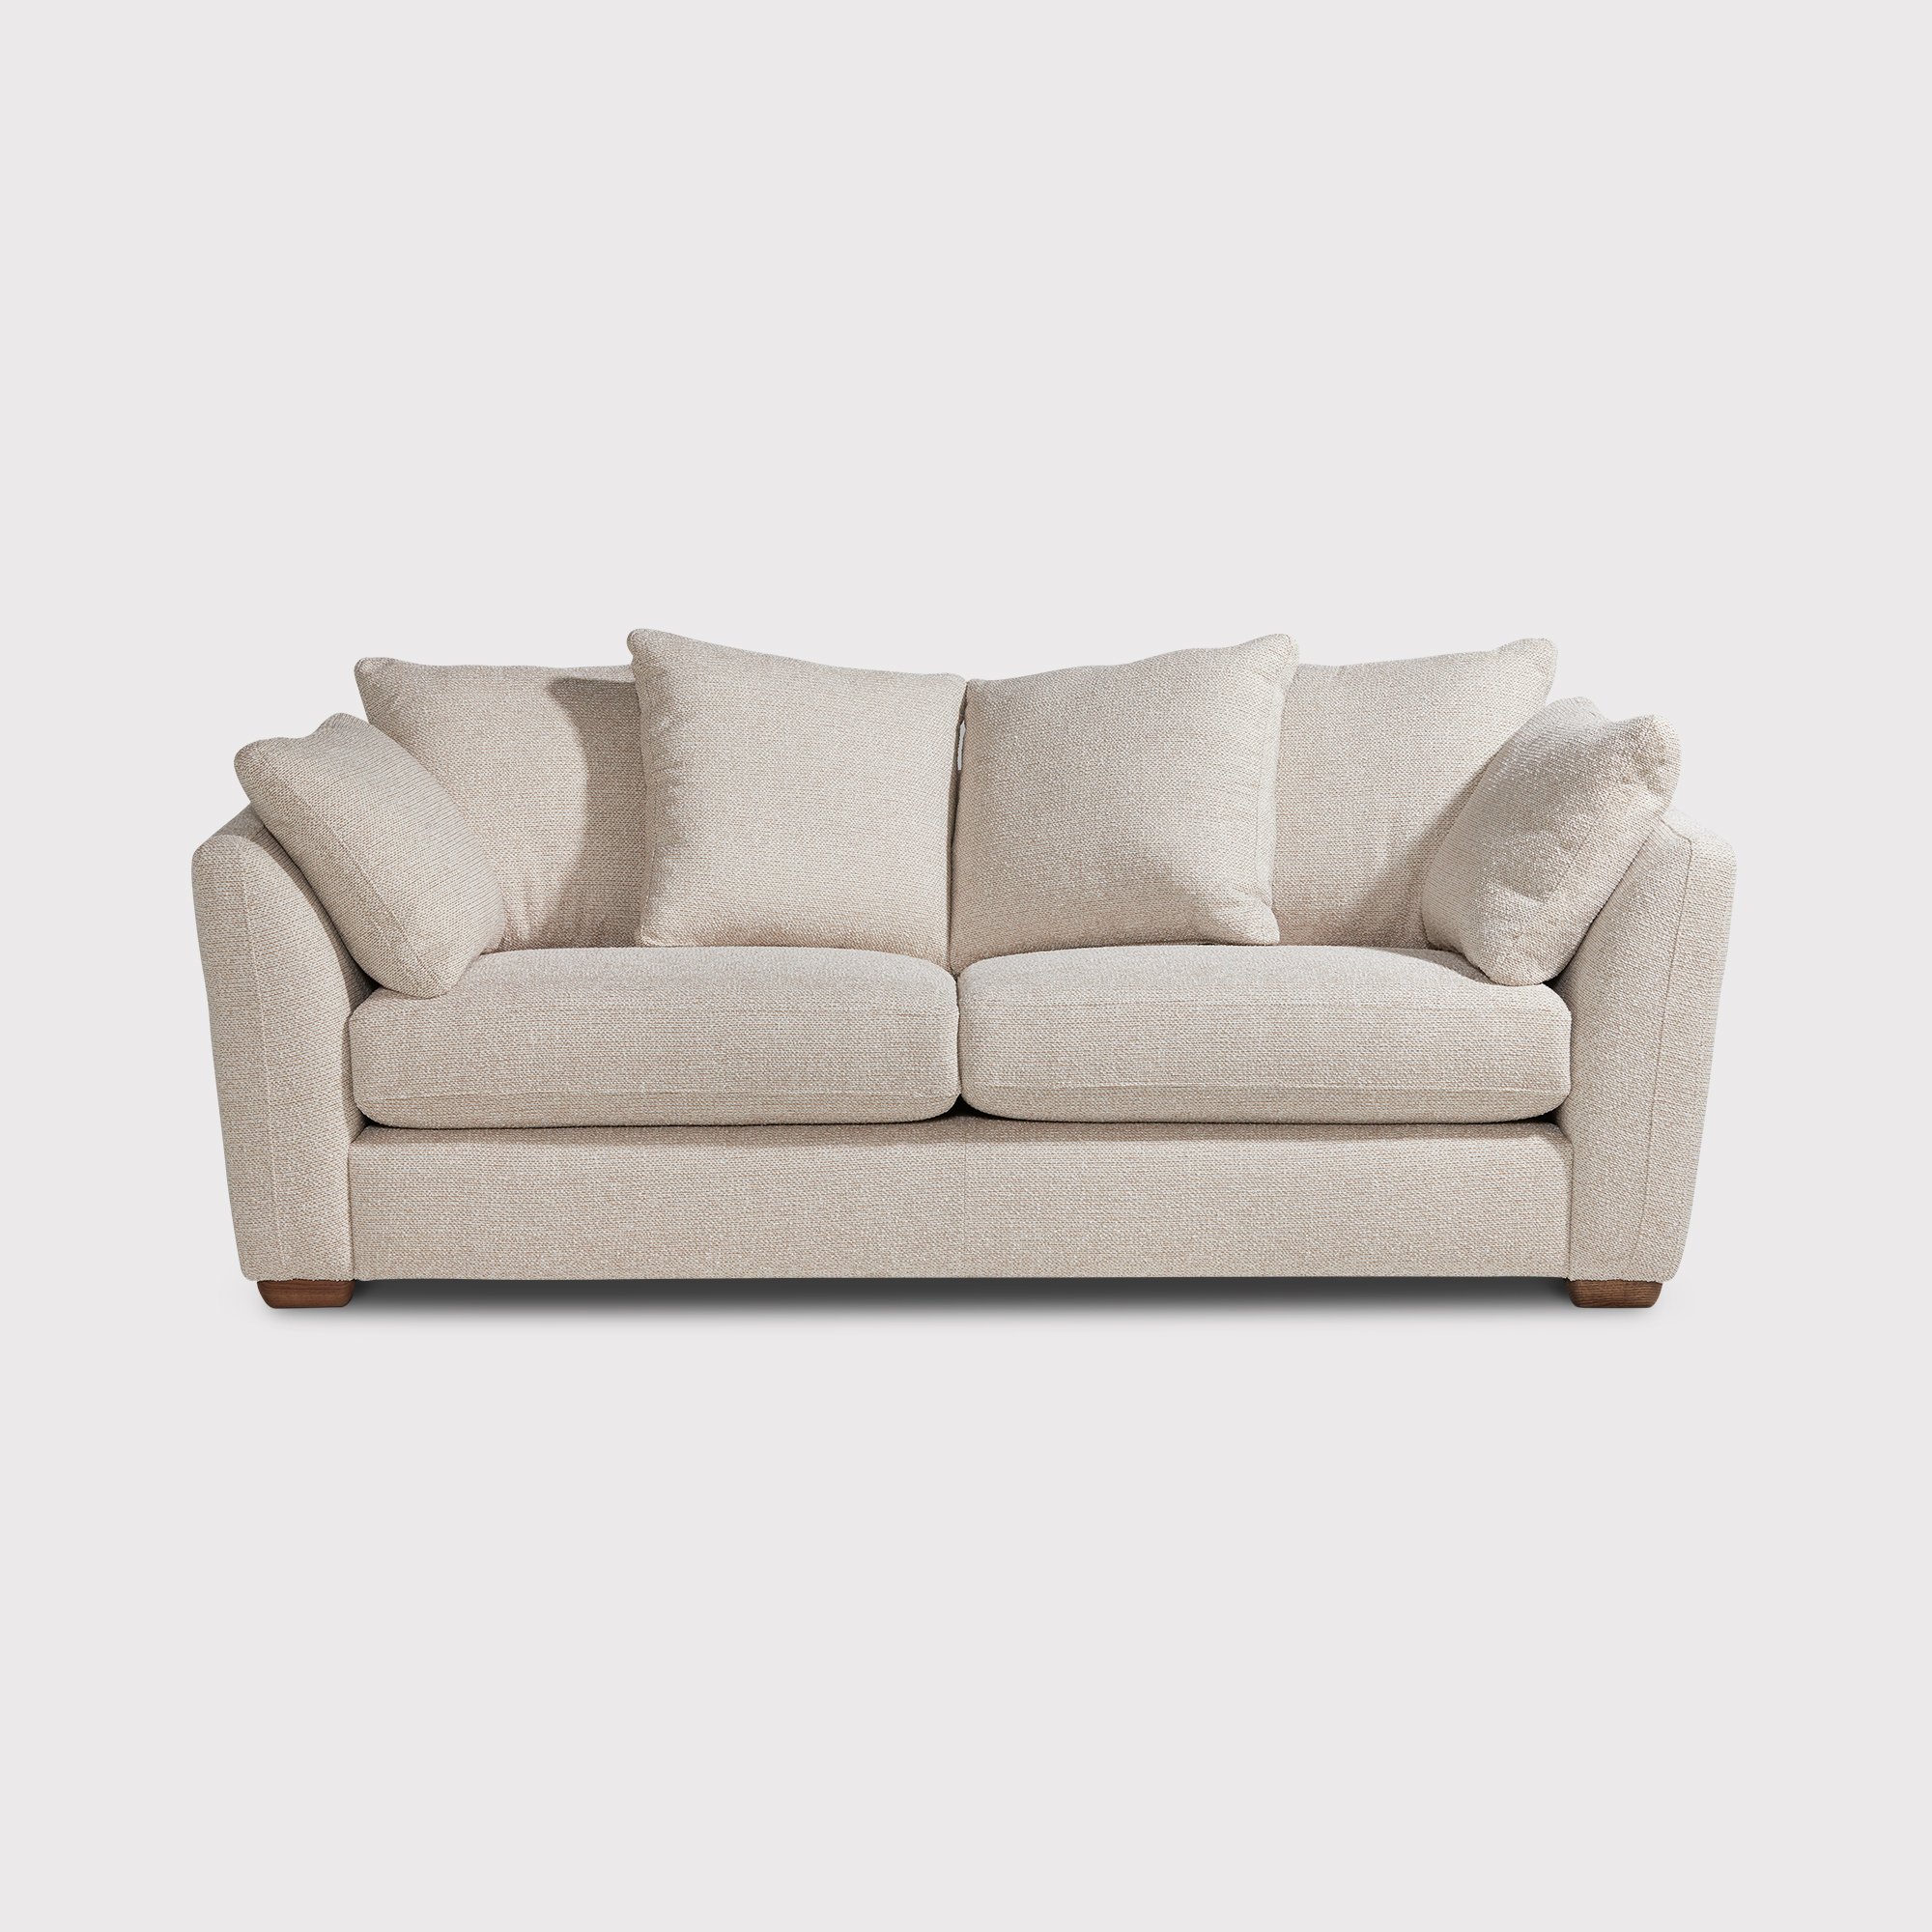 Ludlow 4 Seater Sofa Pillow Back, Neutral Fabric | Barker & Stonehouse